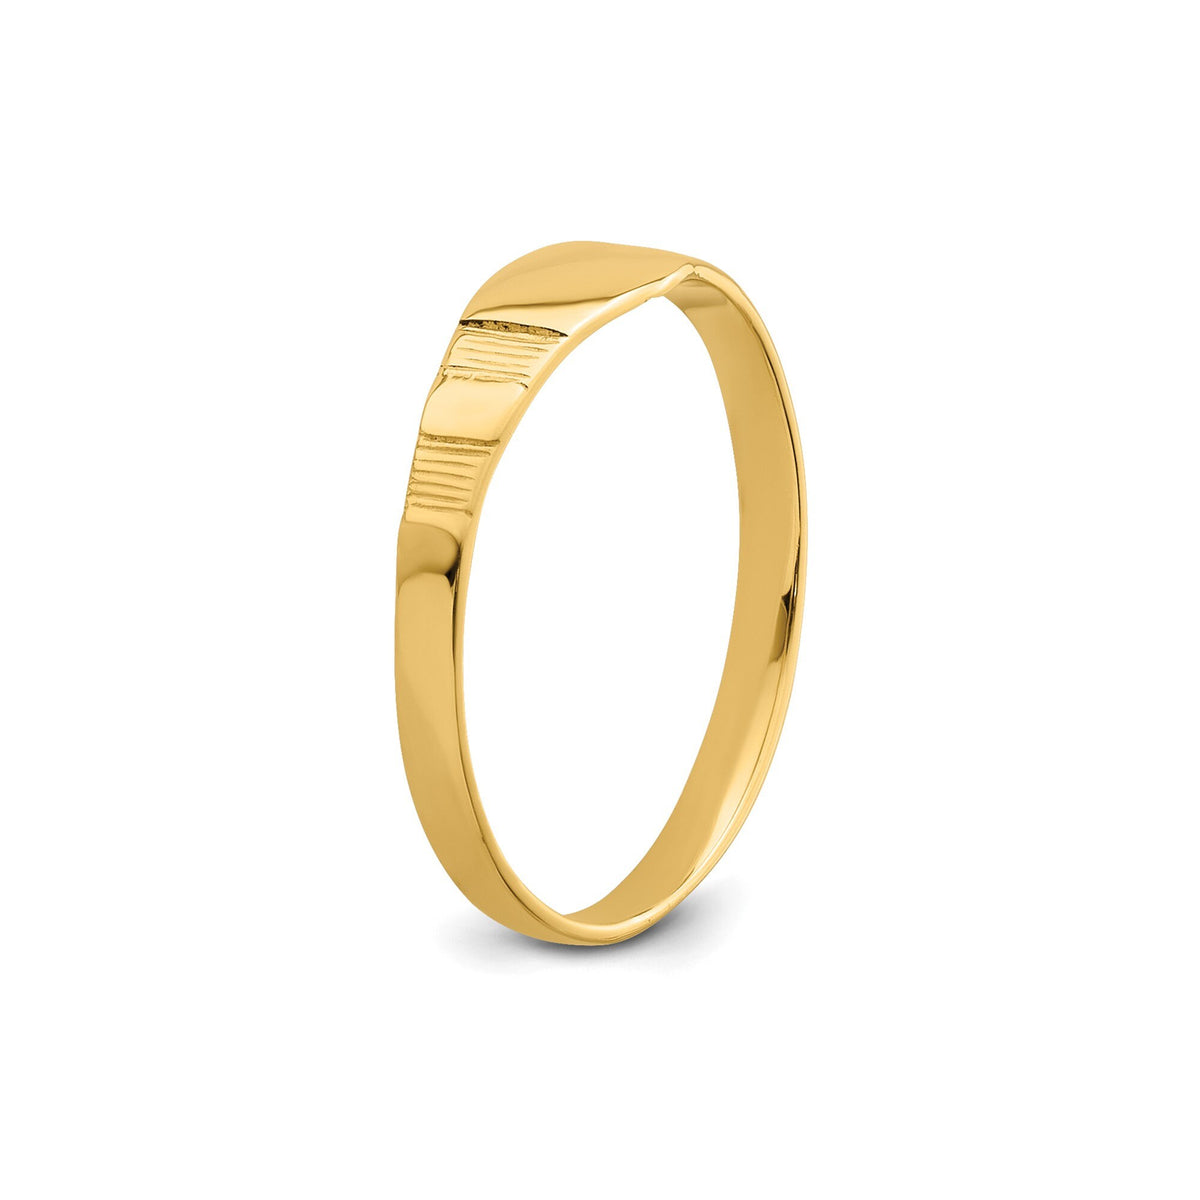 Solid 14k Yellow Gold Engravable Baby-Toddler Signet Ring ( 1 Character ) Gift Box Included